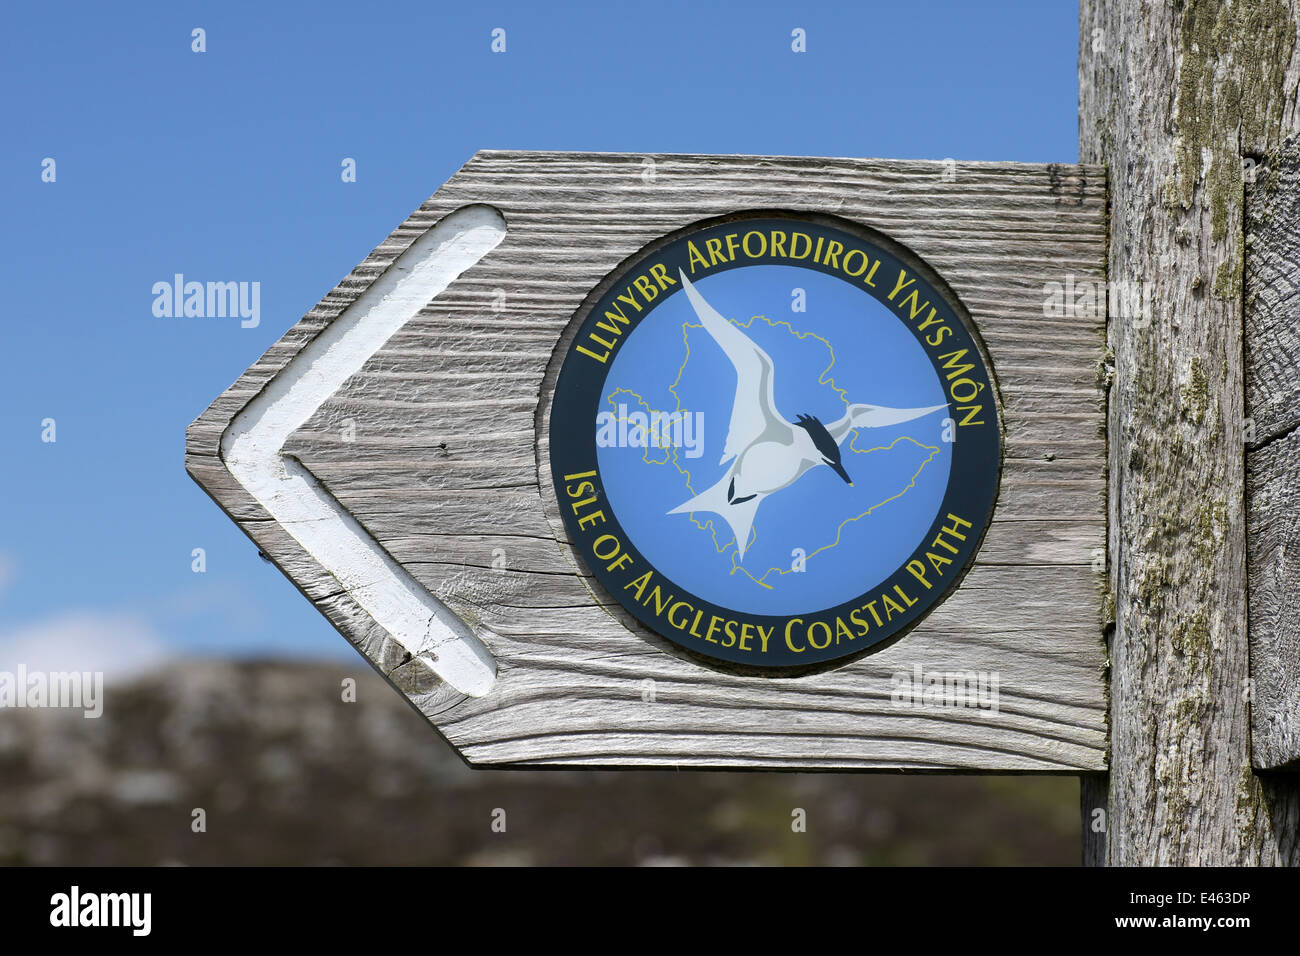 Isle Of Anglesey Coastal Path Sign Banque D'Images